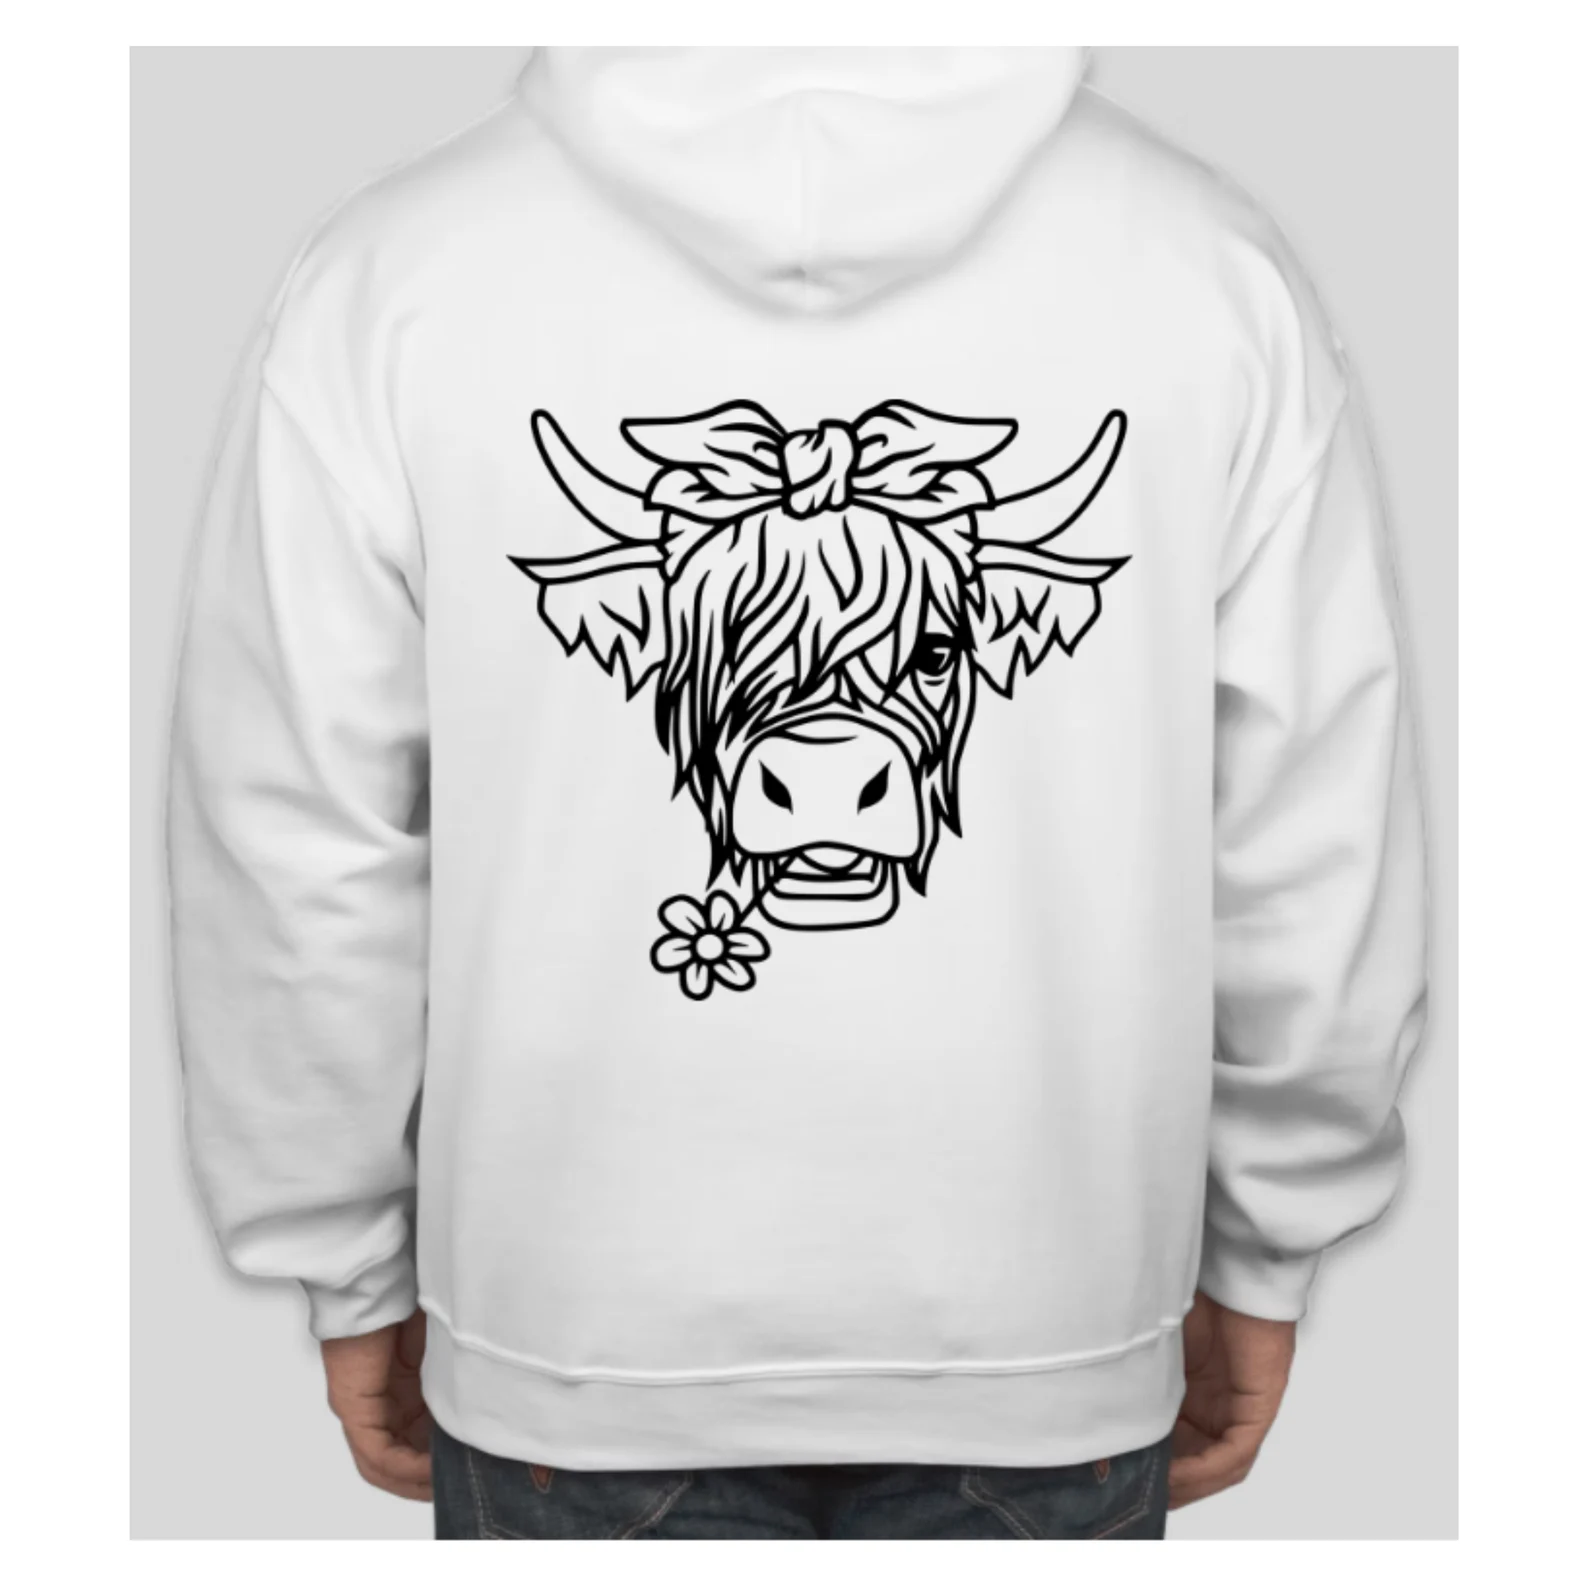 Man wearing a white hoodie with a cow's head drawn on it.